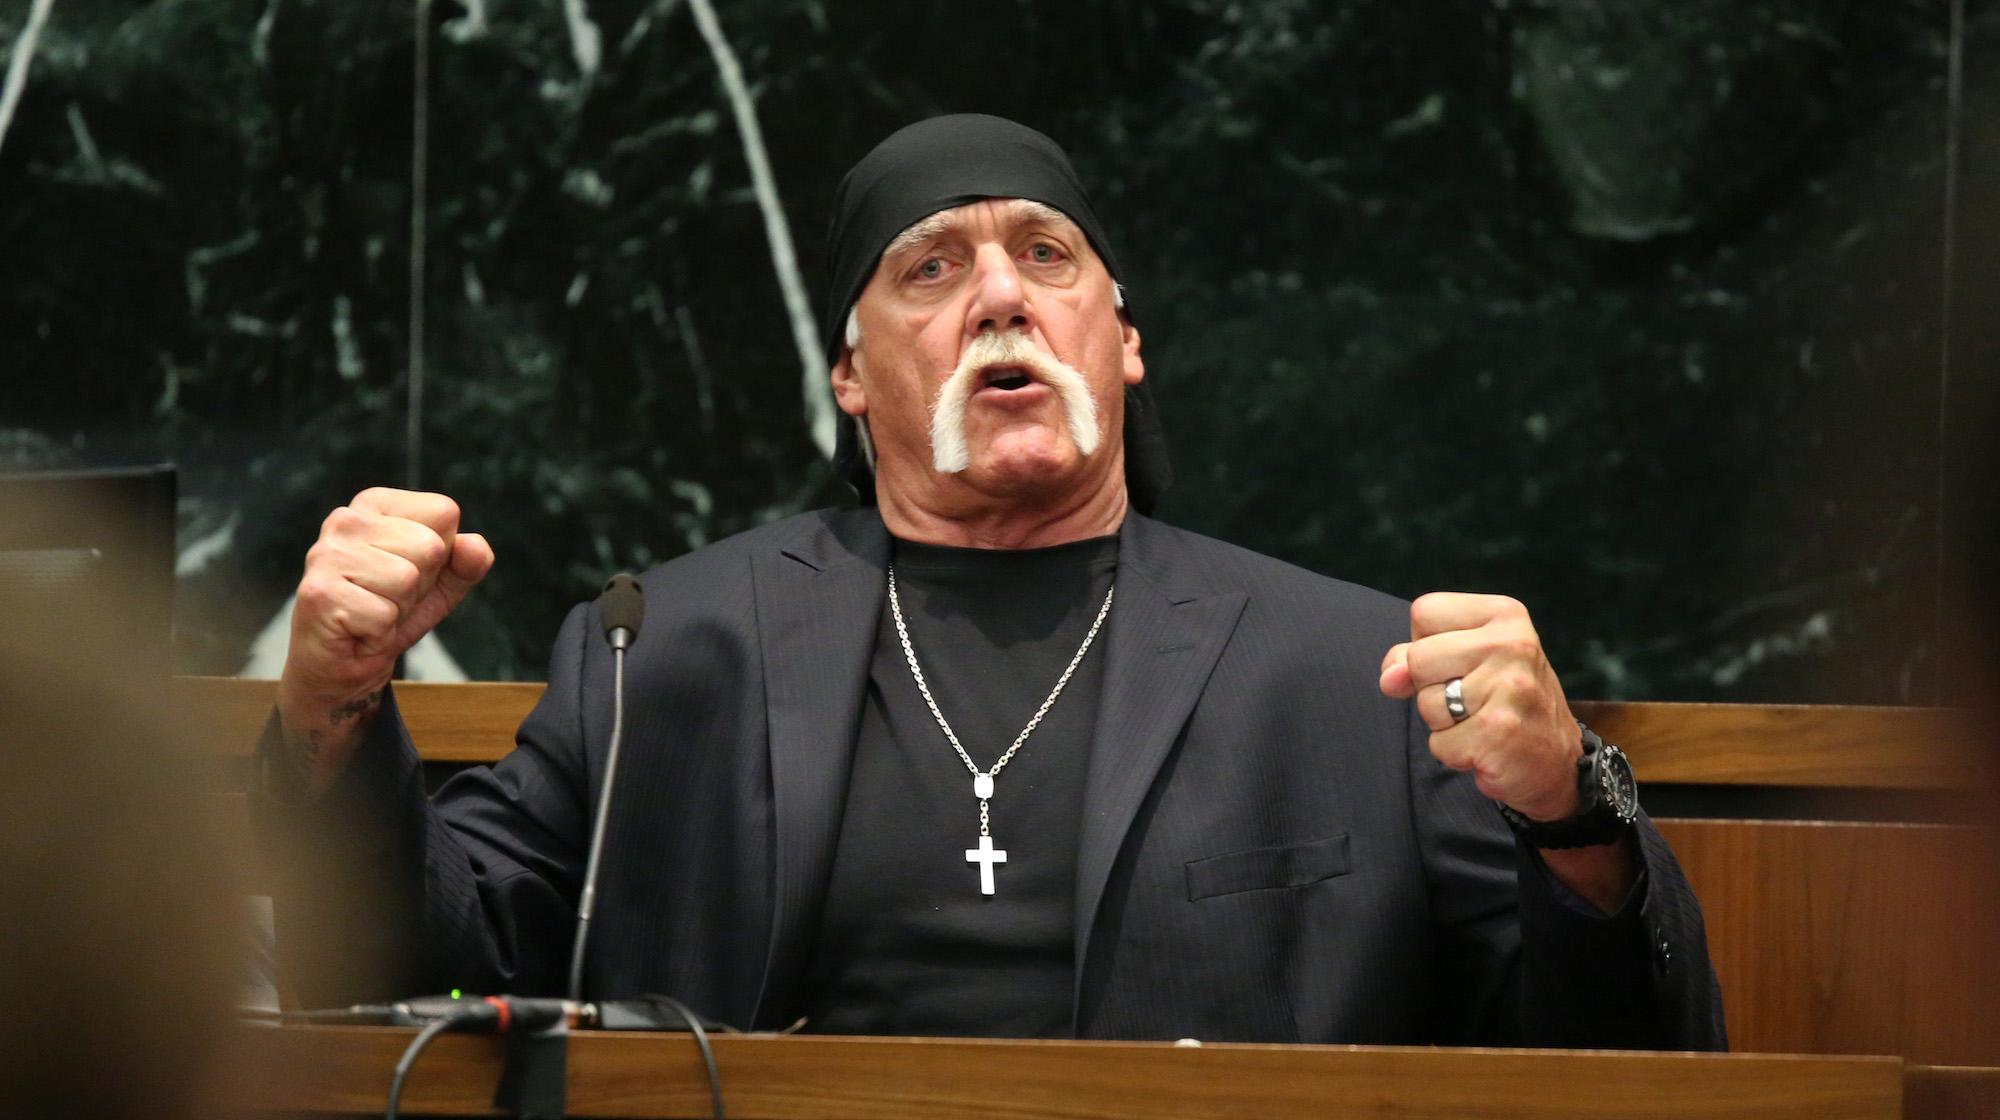 Terry Bollea, aka Hulk Hogan, testifies in court during his trial against Gawker Media at the Pinellas County Courthouse on March 8, 2016 in St Petersburg, Florida. Bollea is taking legal action against Gawker in a USD 100 million lawsuit for releasing a video of him having sex with his best friends wife.